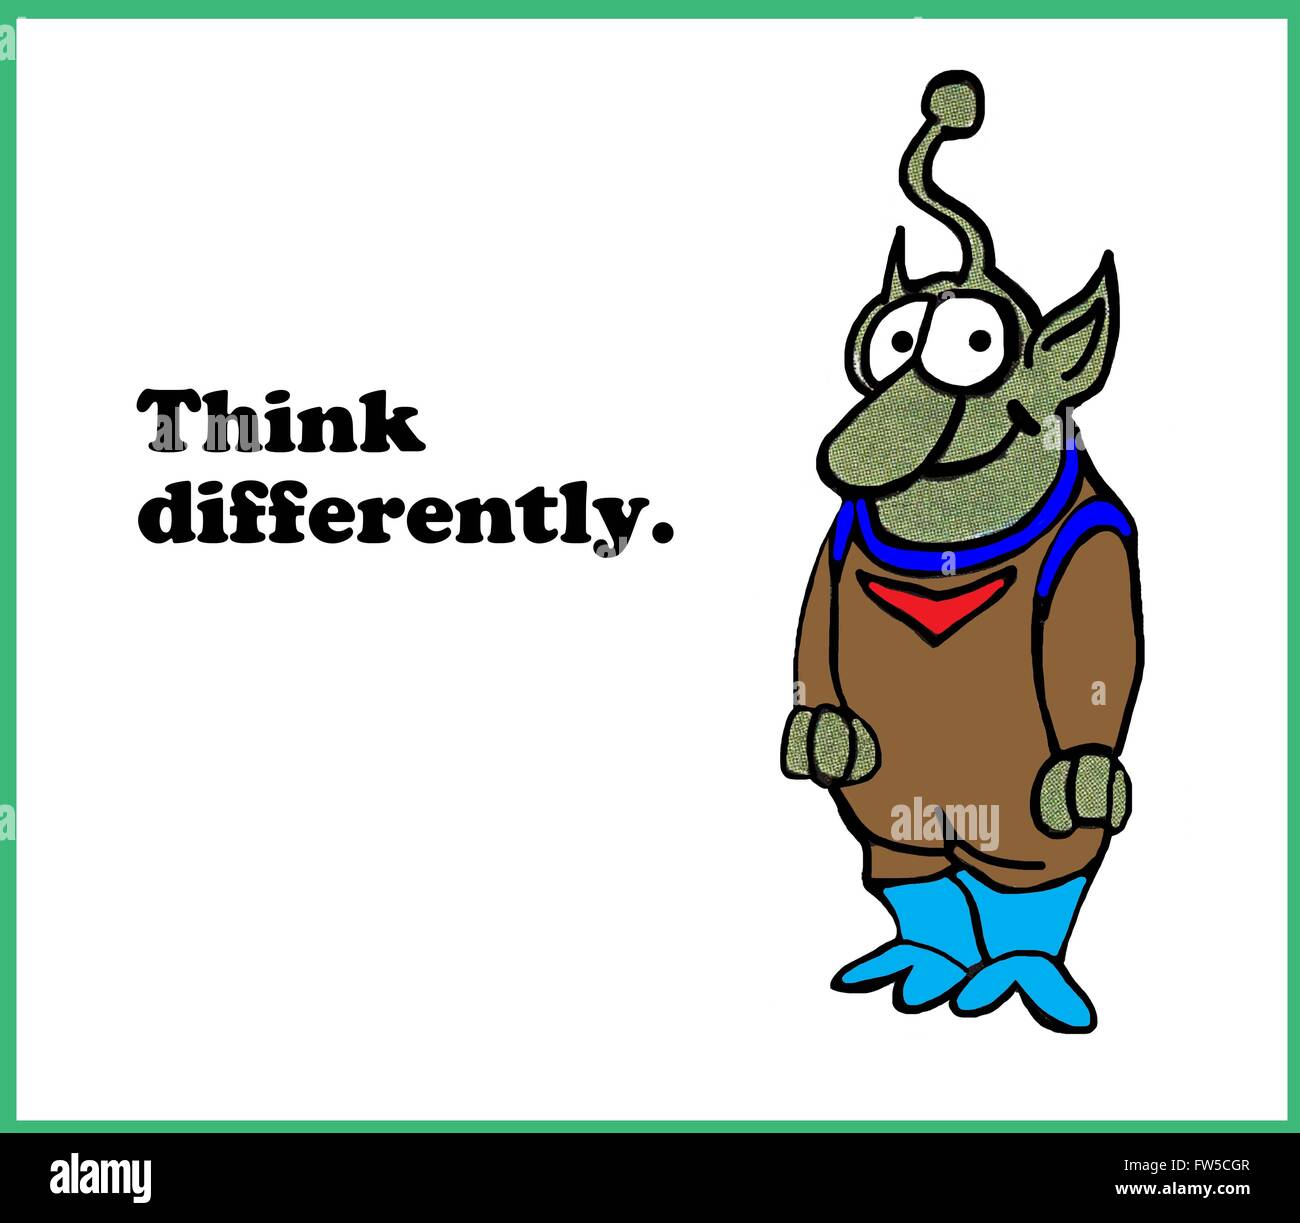 Business and life cartoon encouraging 'think differently'. Stock Photo